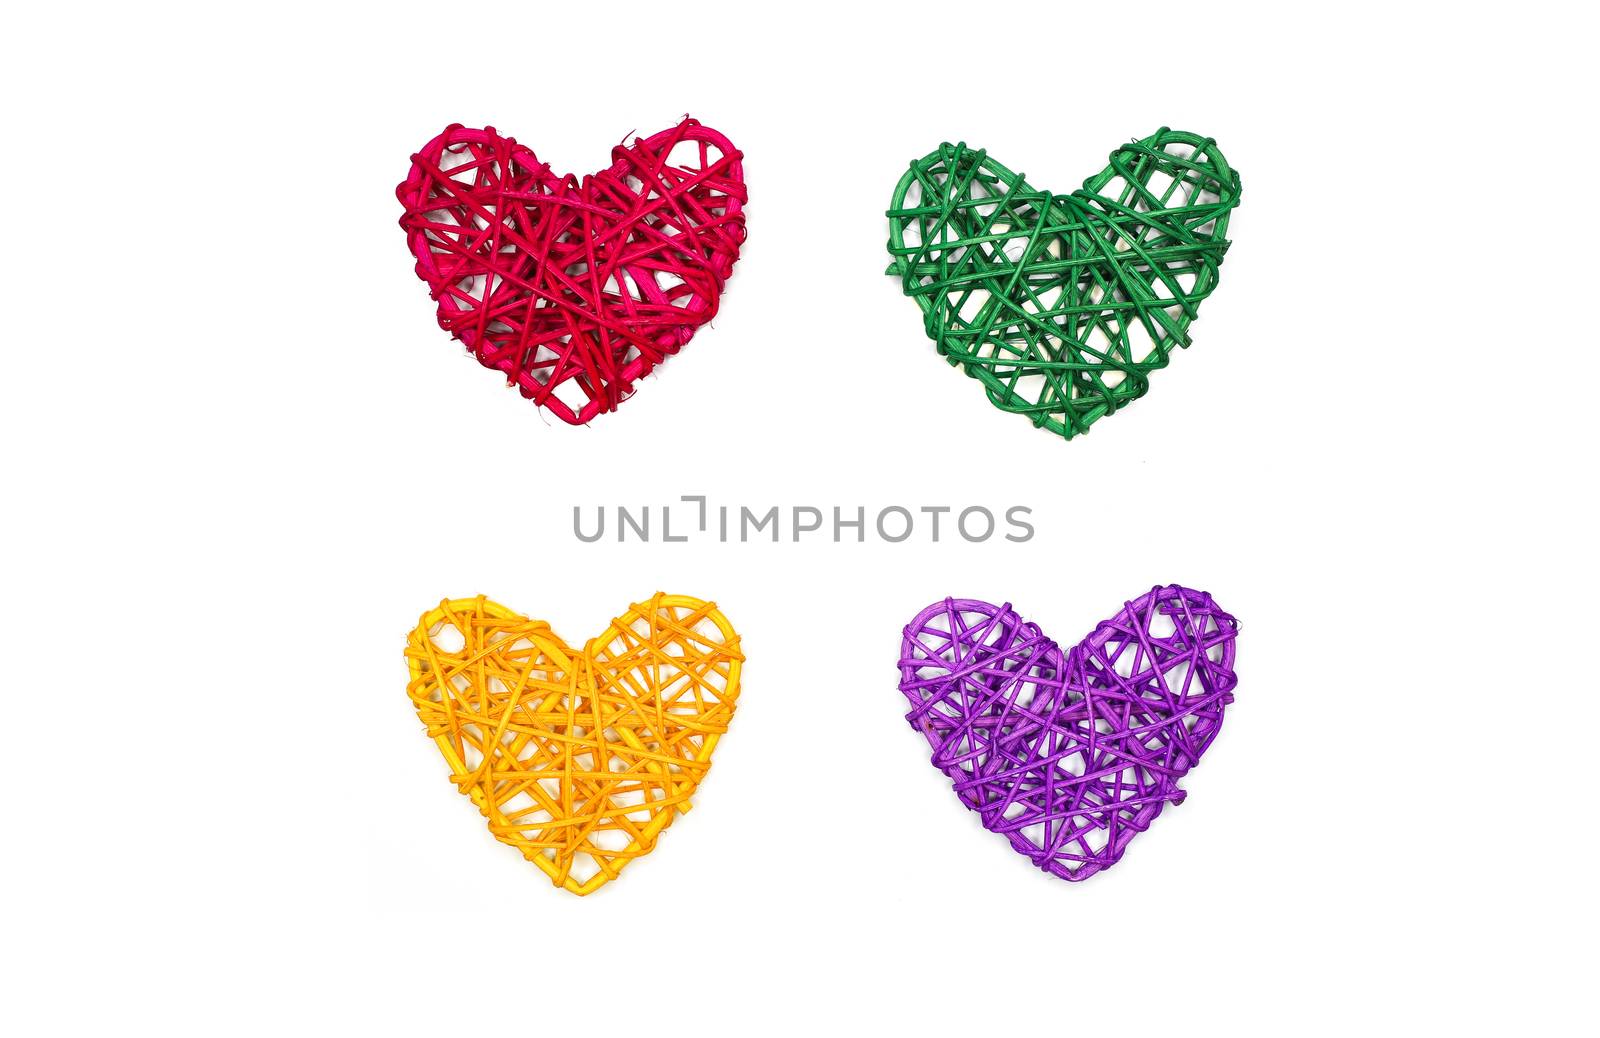 Multicolor hearts made of natural rattan arranged in squire pattern. Love, romance concept.